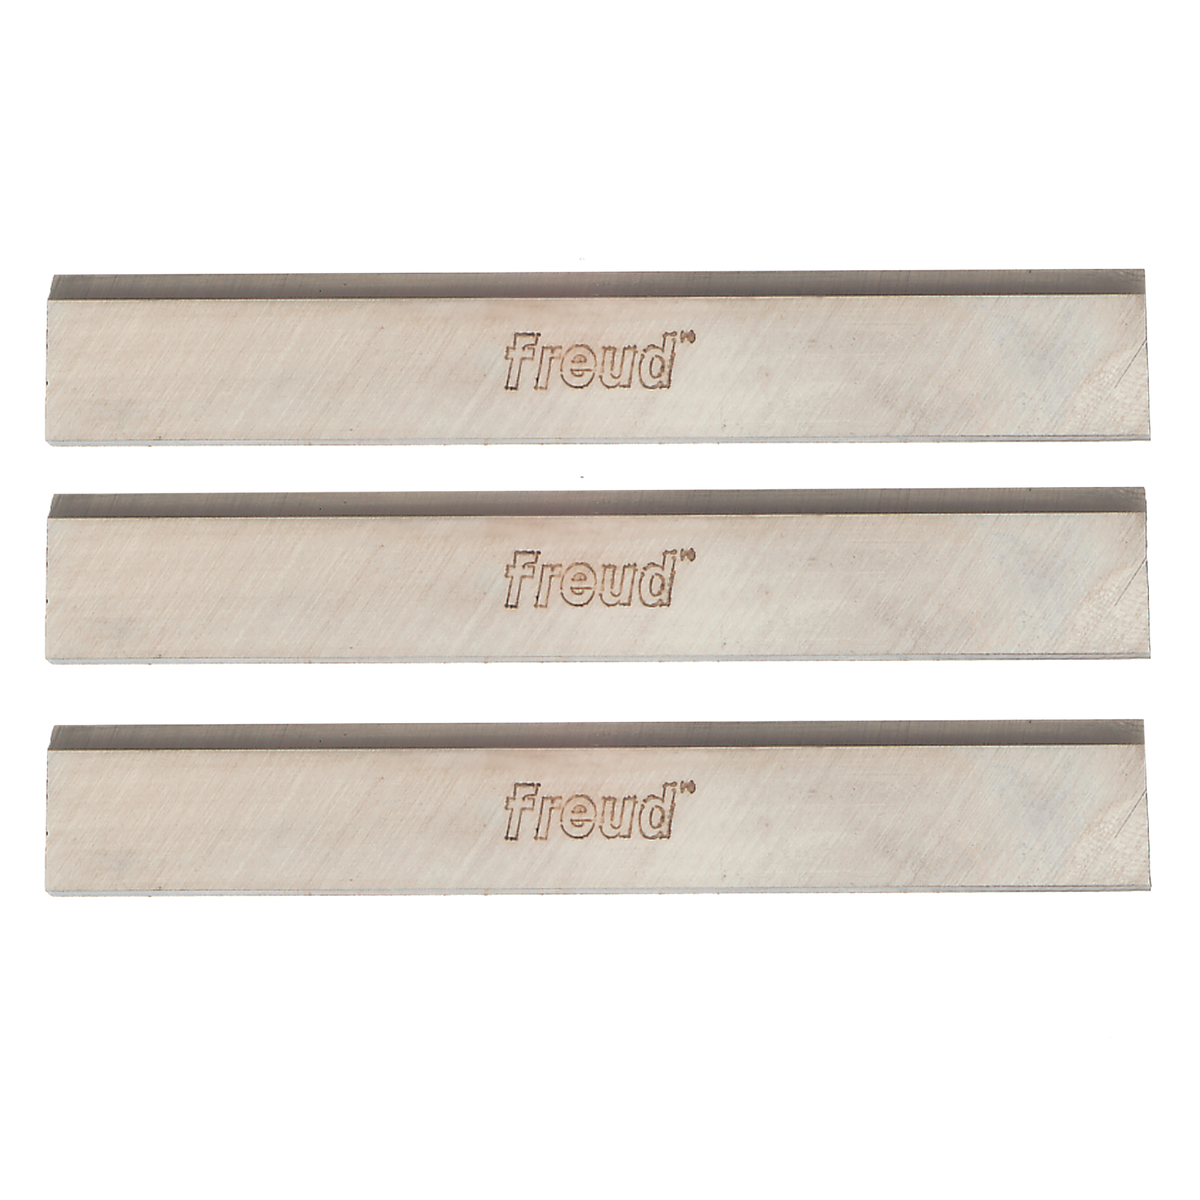 Freud 0” to 9” Length Knives Inserts